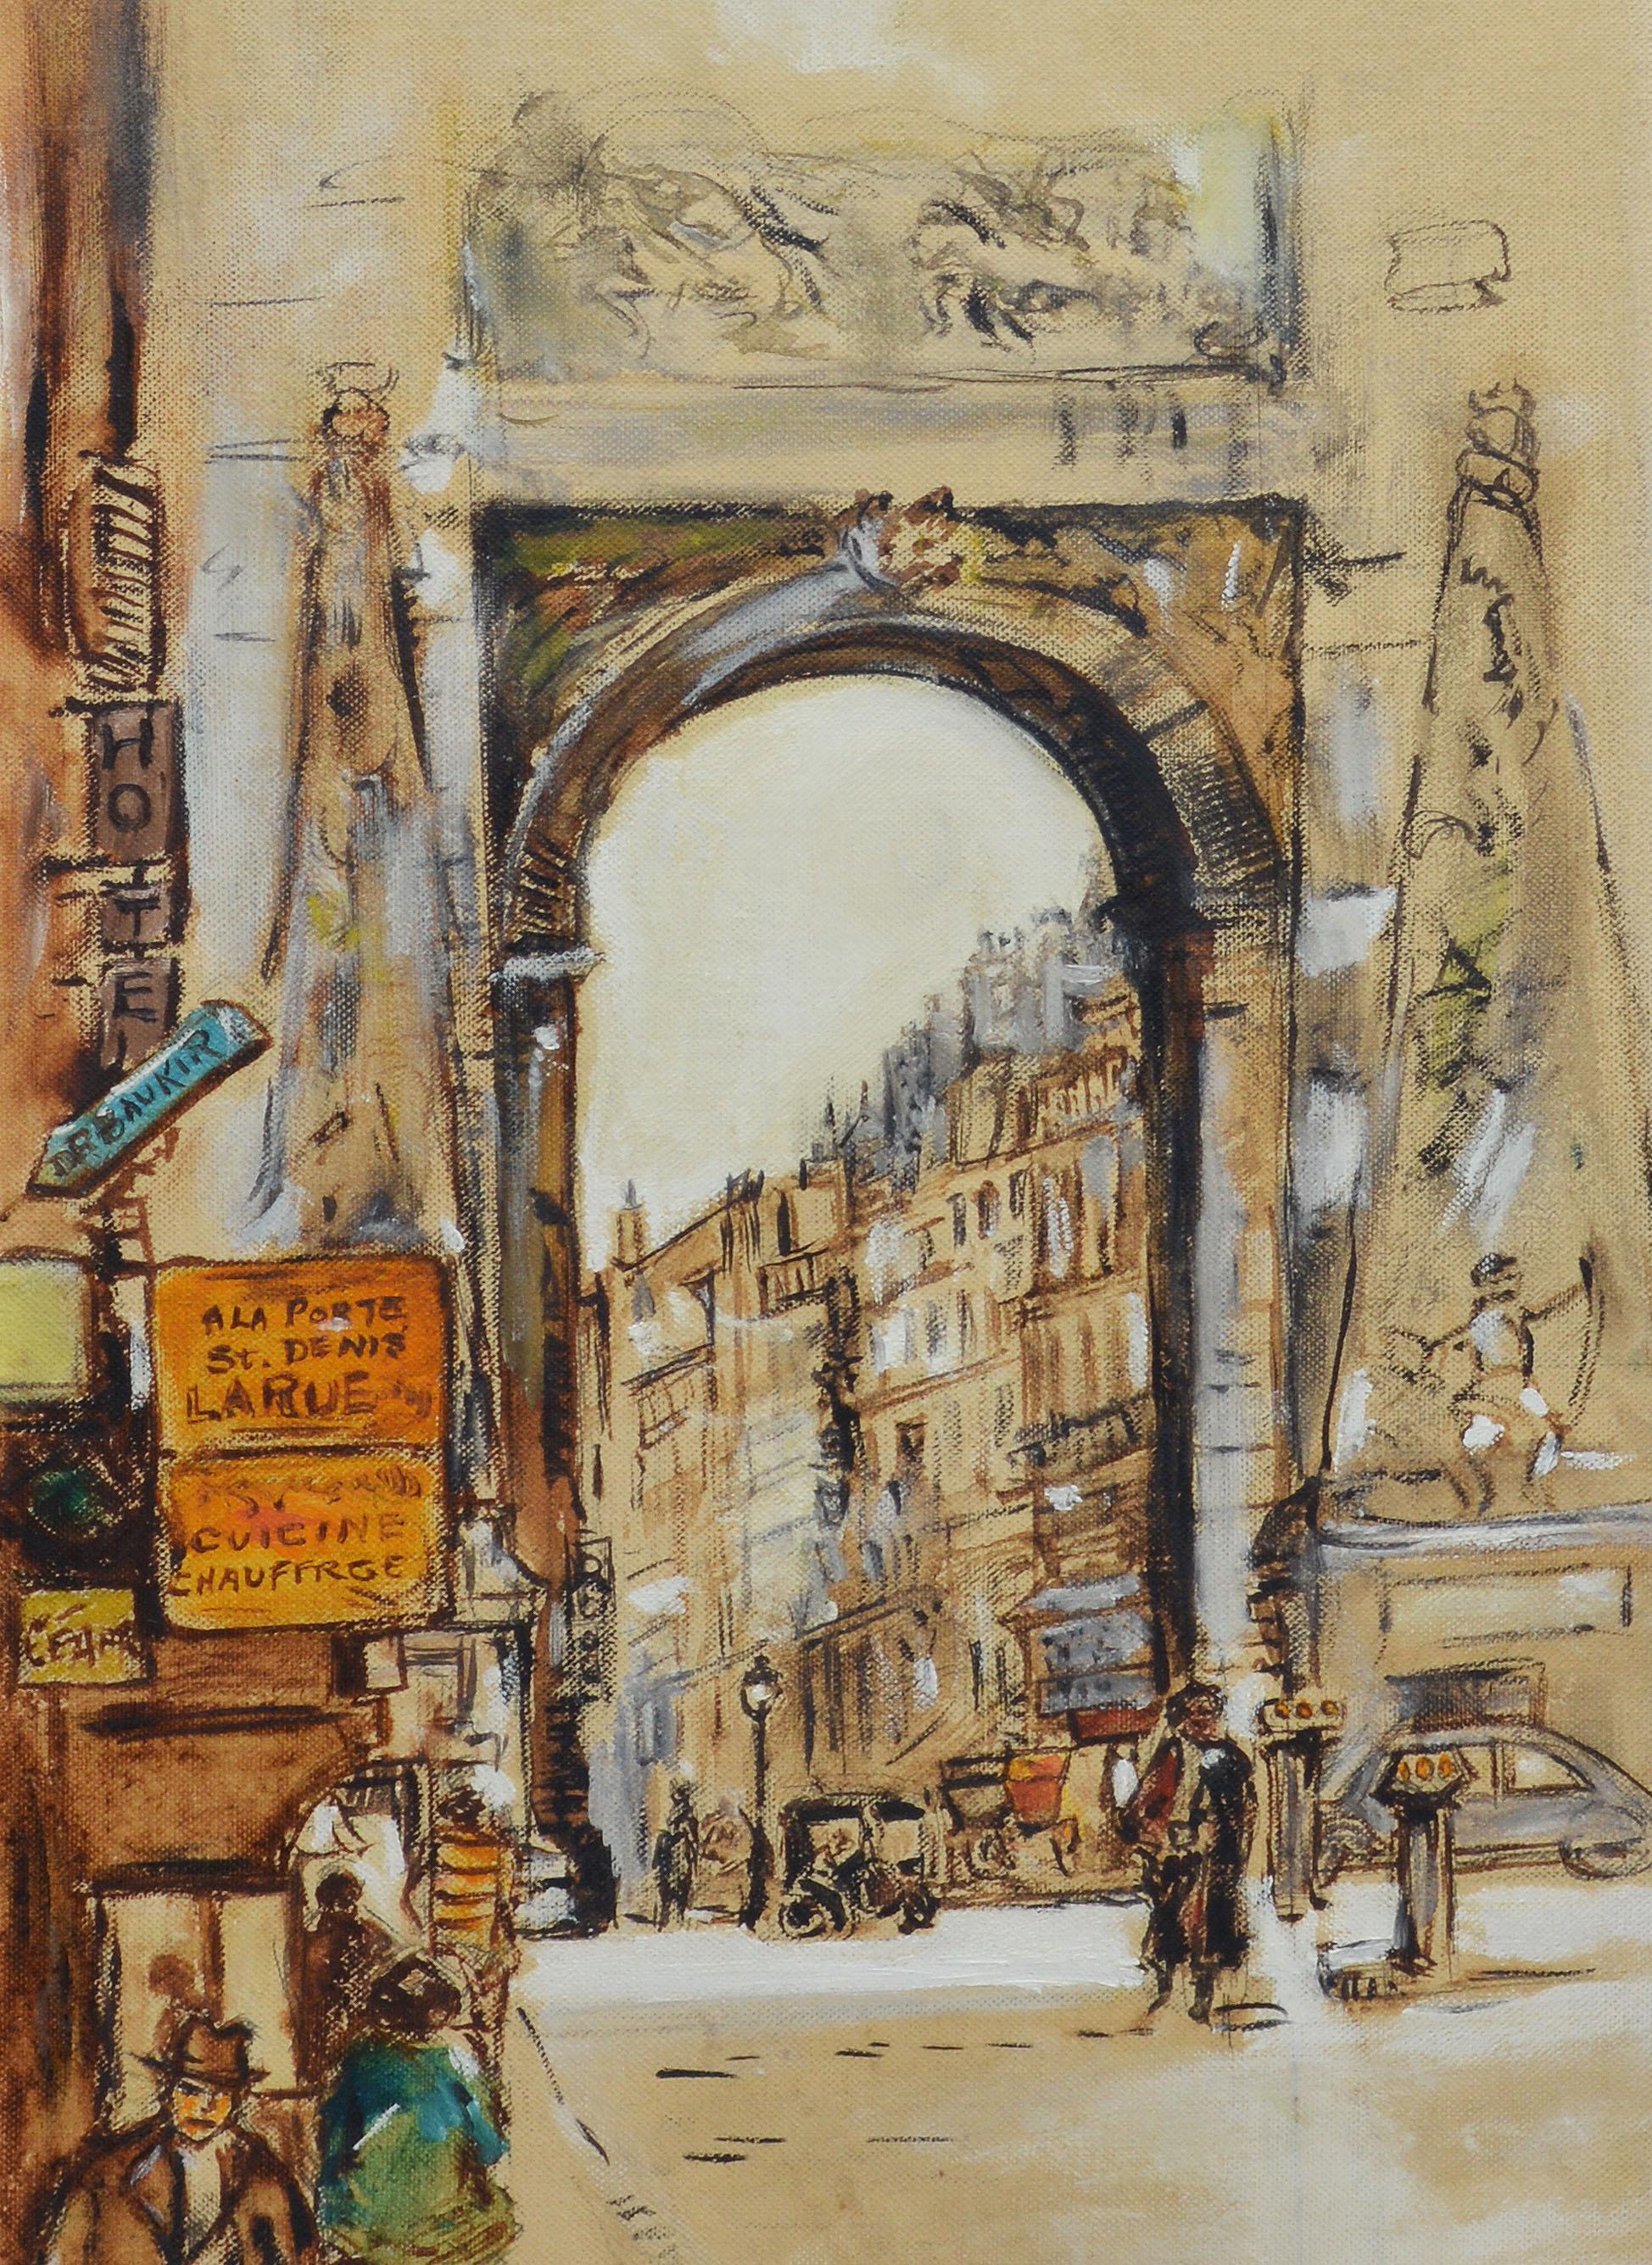 Antique impressionist oil painting of Paris by Jan Korthals  (1916 - 1972).  Oil on board, circa 1940. Signed.  Displayed in a period giltwood frame.  Image, 10.5